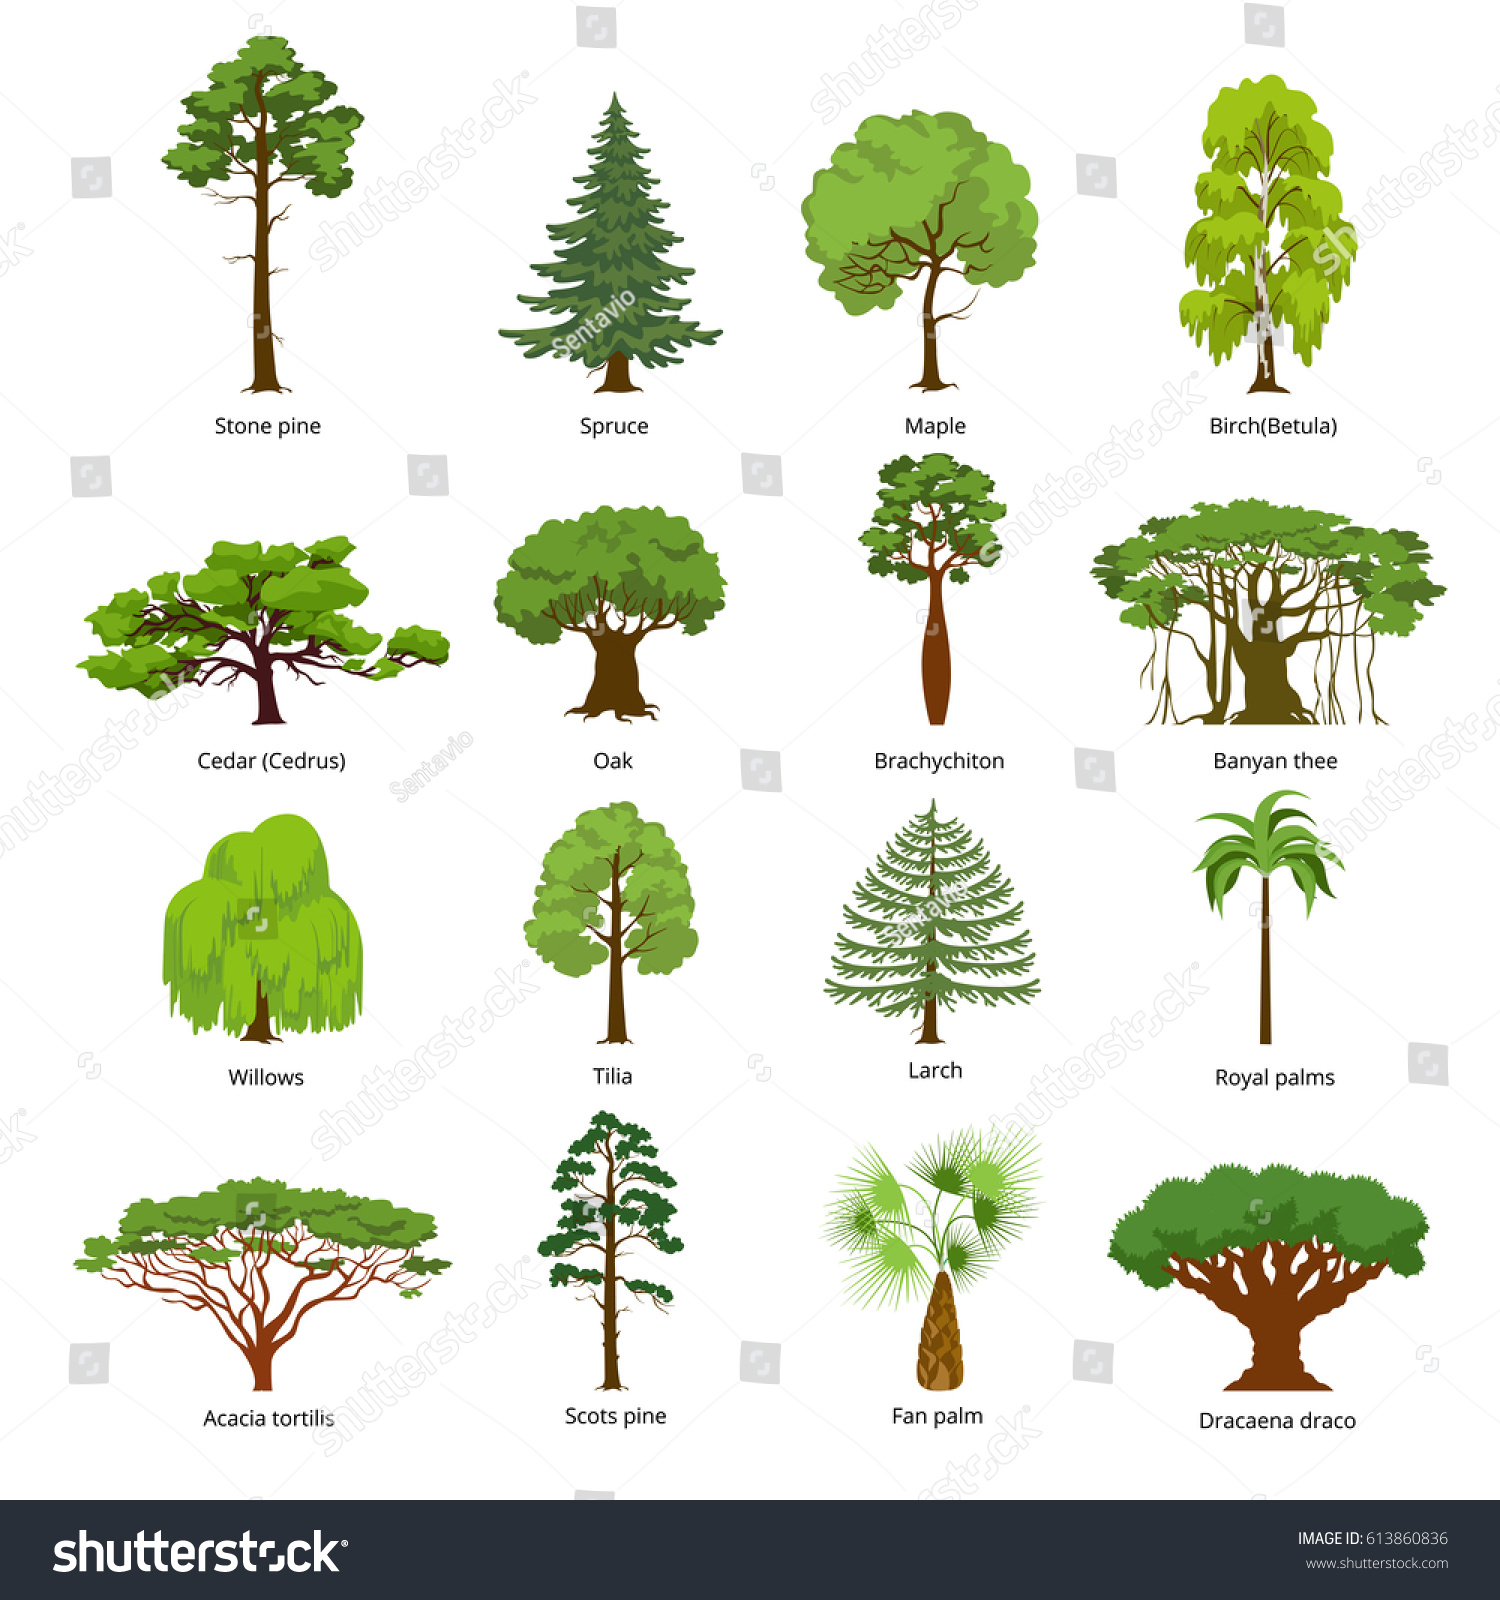 Flat green trees vector illustration set. Stone pine, spruce, maple, birch, cedar, oak, brachychiton, banyan, willow, larch, palm, scots pine forest tree icons. Nature concept. #613860836